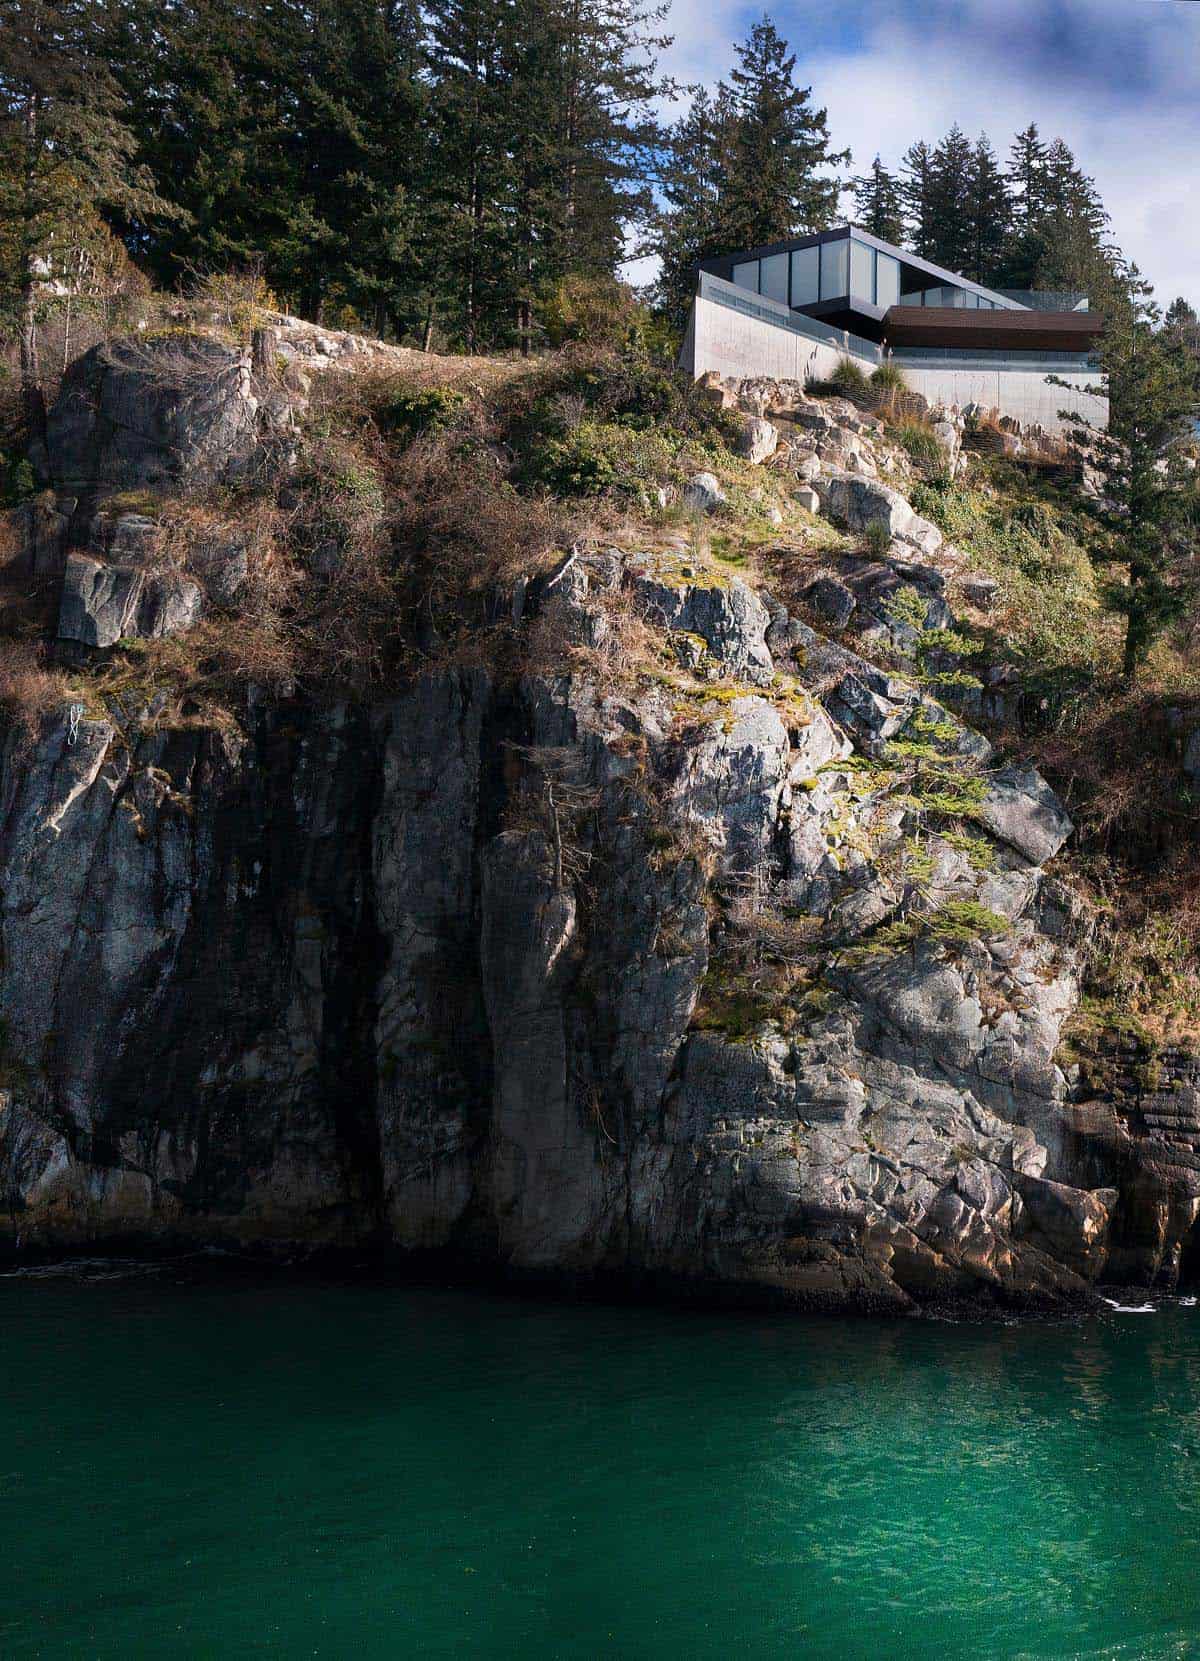 view from the shoreline of the modern house perched on a granite rock